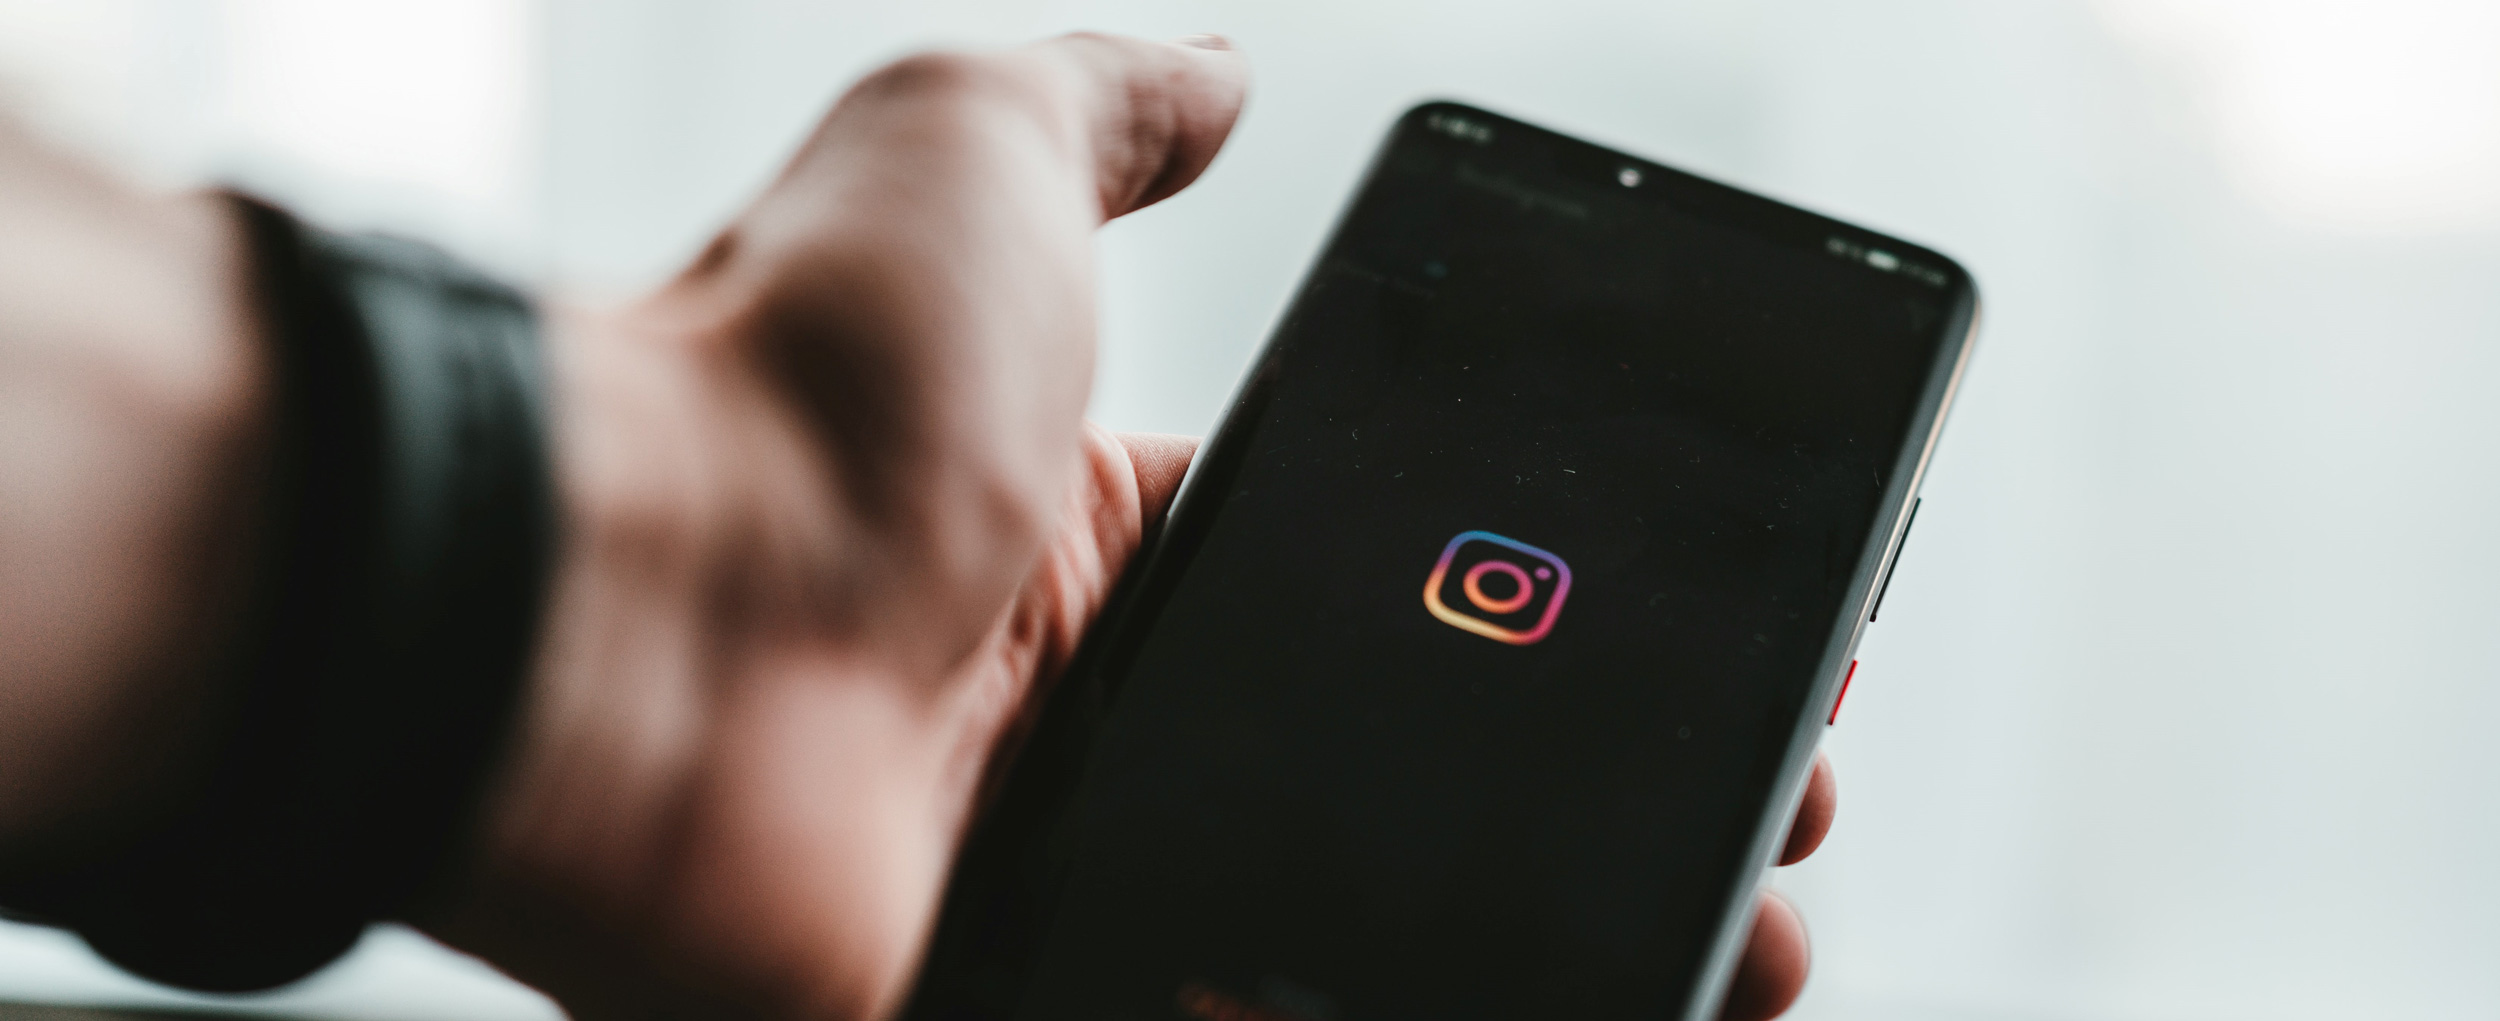 Instagram Advertising: A step-by-step guide to creating your first campaign